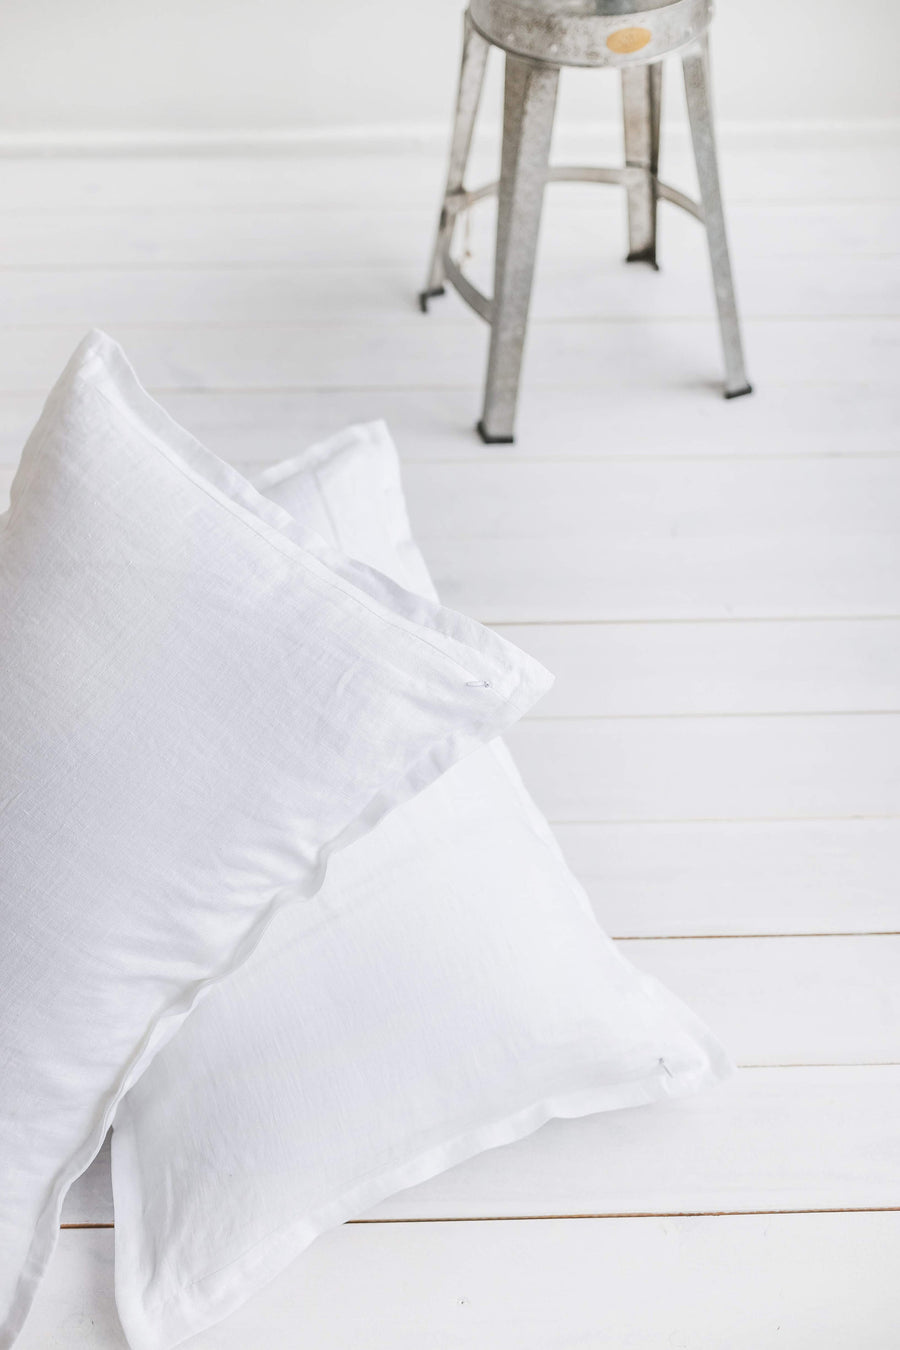 White Flanged Linen Pillow Case